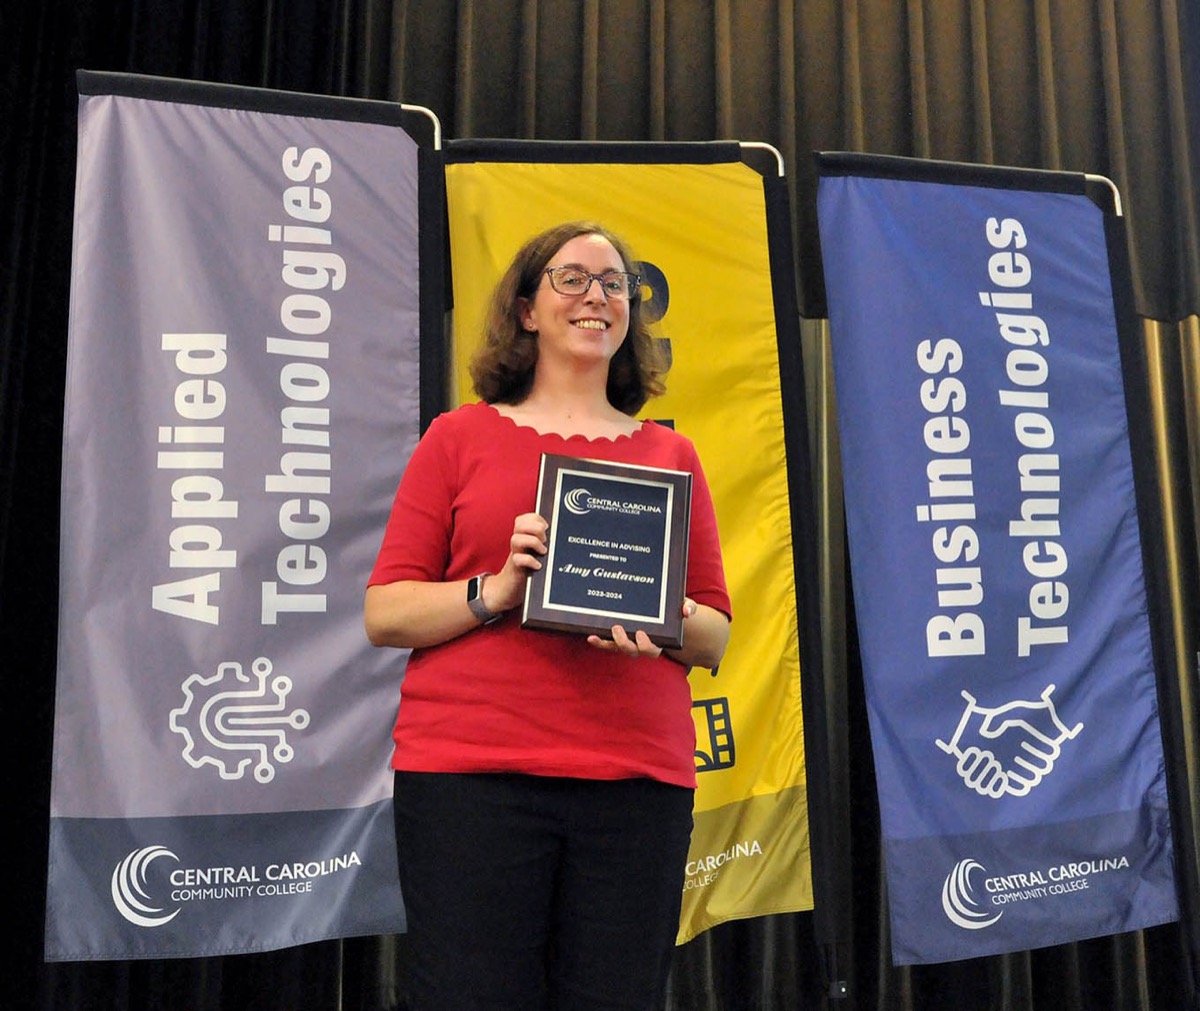 Amy Gustavson receives CCCC Excellence in Advising Award